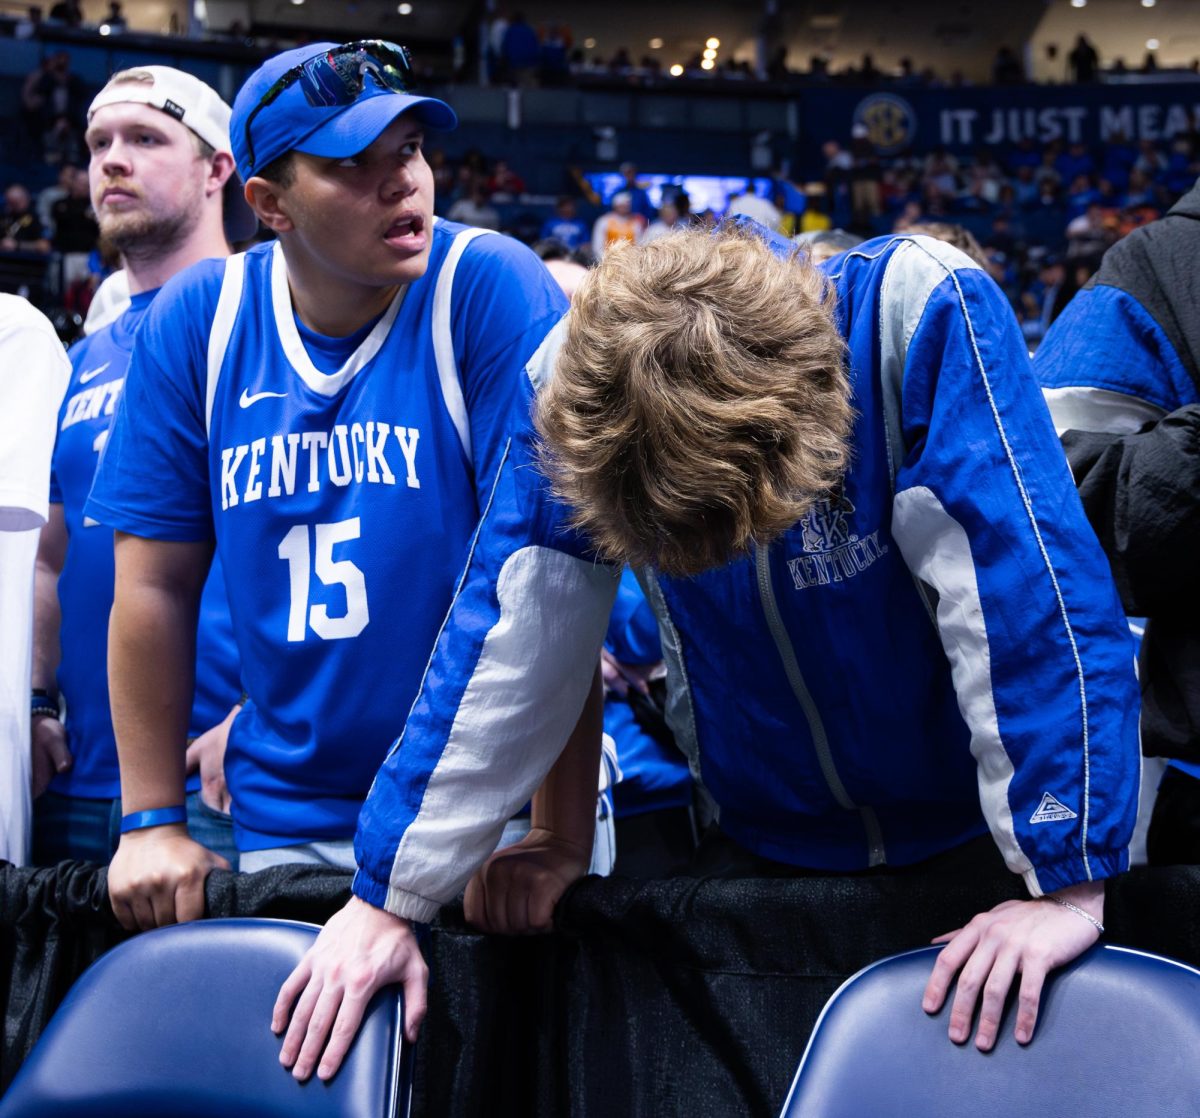 Fans+from+the+Kentucky+student+section+react+to+the+loss+after+the+No.+2+Kentucky+vs.+No.+7+Texas+A%26M+mens+basketball+match+in+the+SEC+Tournament+quarterfinals+on+Friday%2C+March+15%2C+2024%2C+at+Bridgestone+Arena+in+Nashville%2C+Tennessee.+Kentucky+lost+97-87.+Photo+by+Samuel+Colmar+%7C+Staff